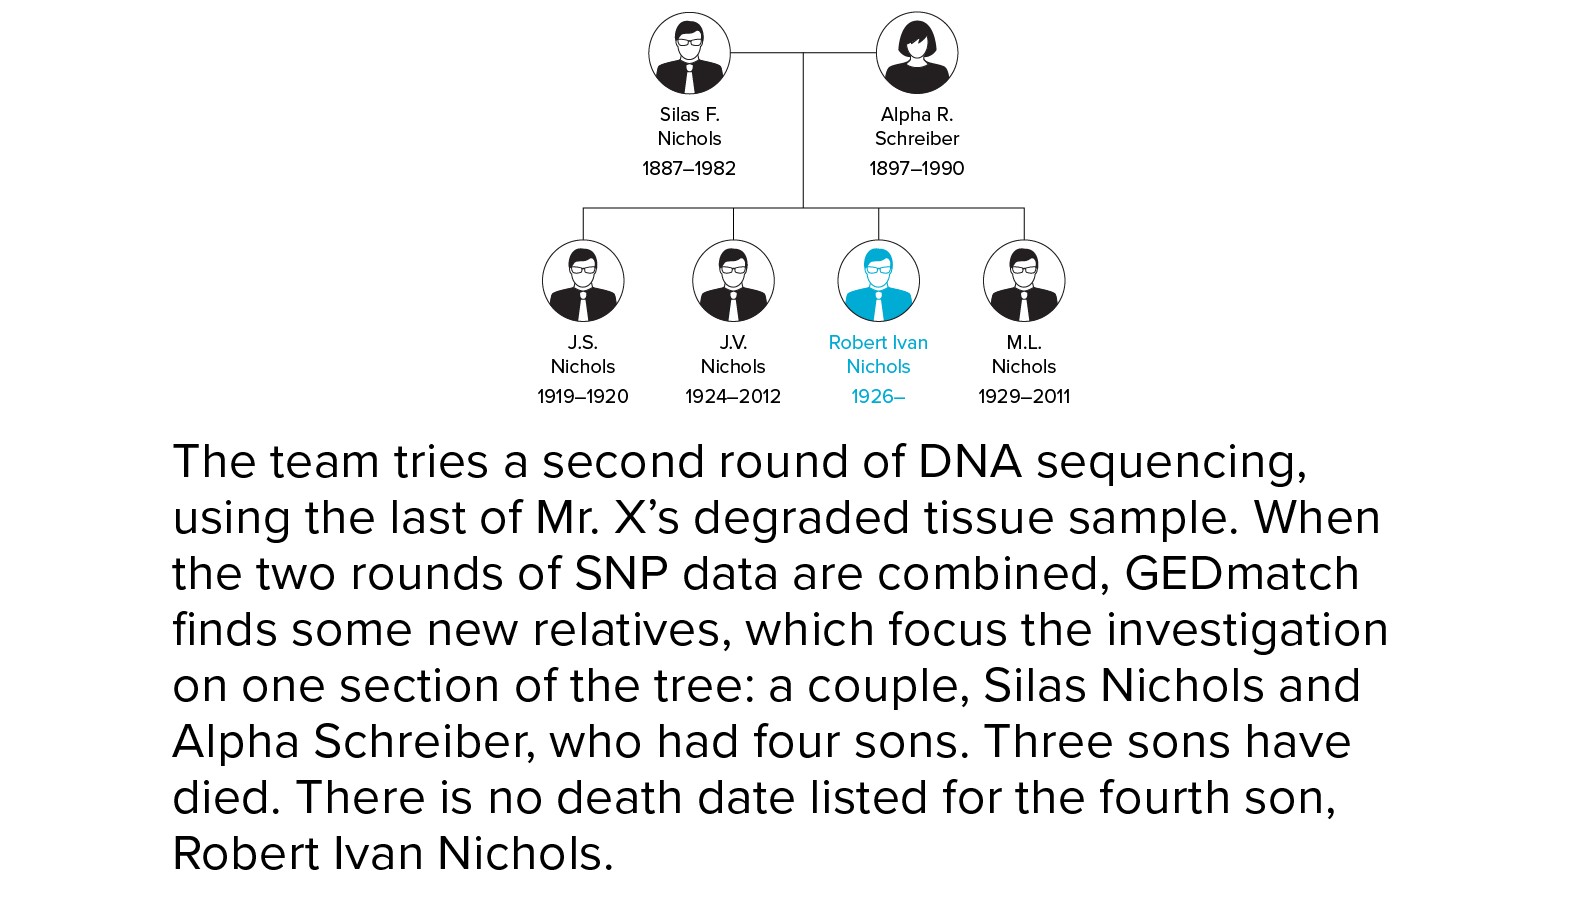 The team tries a second round of DNA sequencing, using the last of Mr. X’s degraded tissue sample. When the two rounds of SNP data are combined, GEDmatch finds some new relatives, which focus the investigation on one section of the tree: a couple, Silas Nichols and Alpha Schreiber, who had four sons. Three sons have died. There is no death date listed for the fourth son, Robert Ivan Nichols.